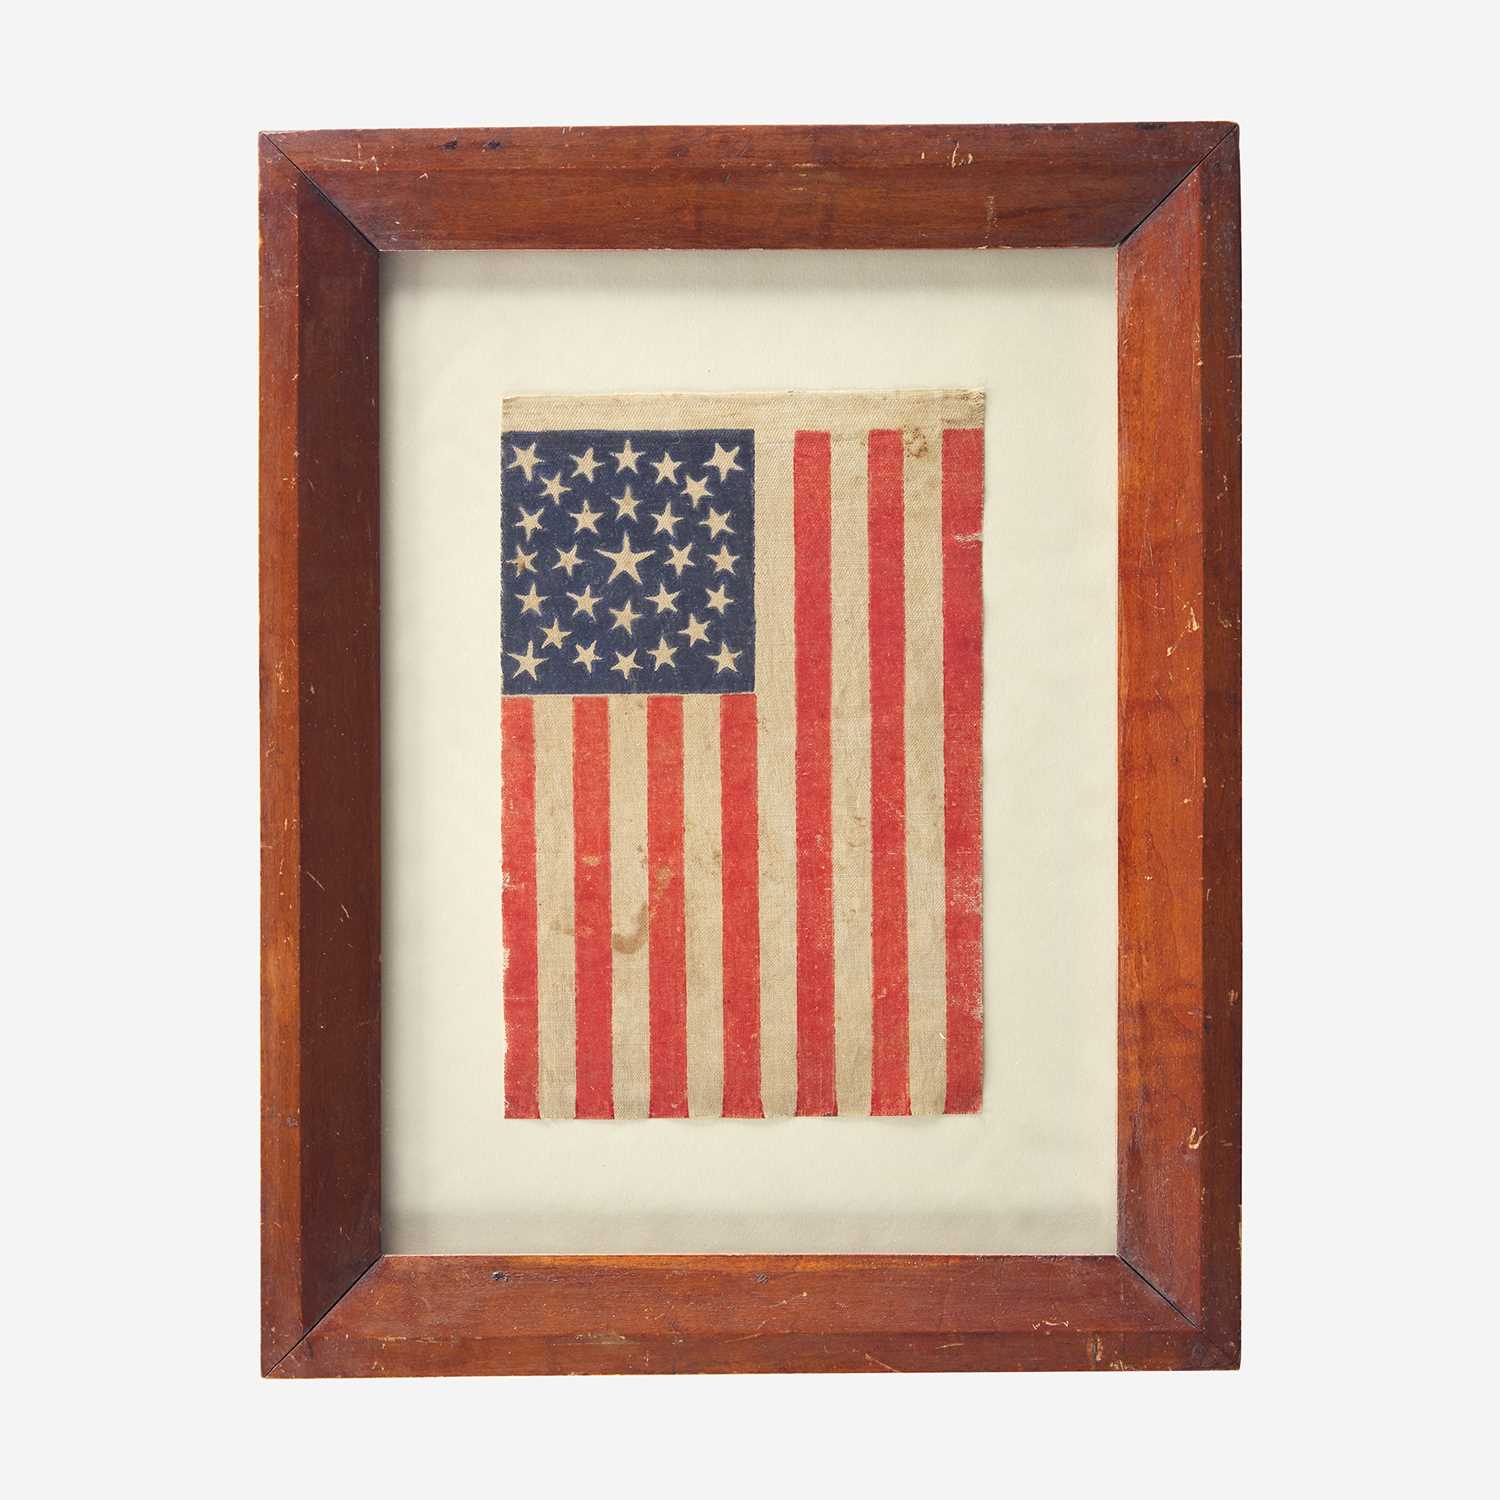 Lot 12 - A 29-Star American National Parade Flag commemorating Iowa statehood